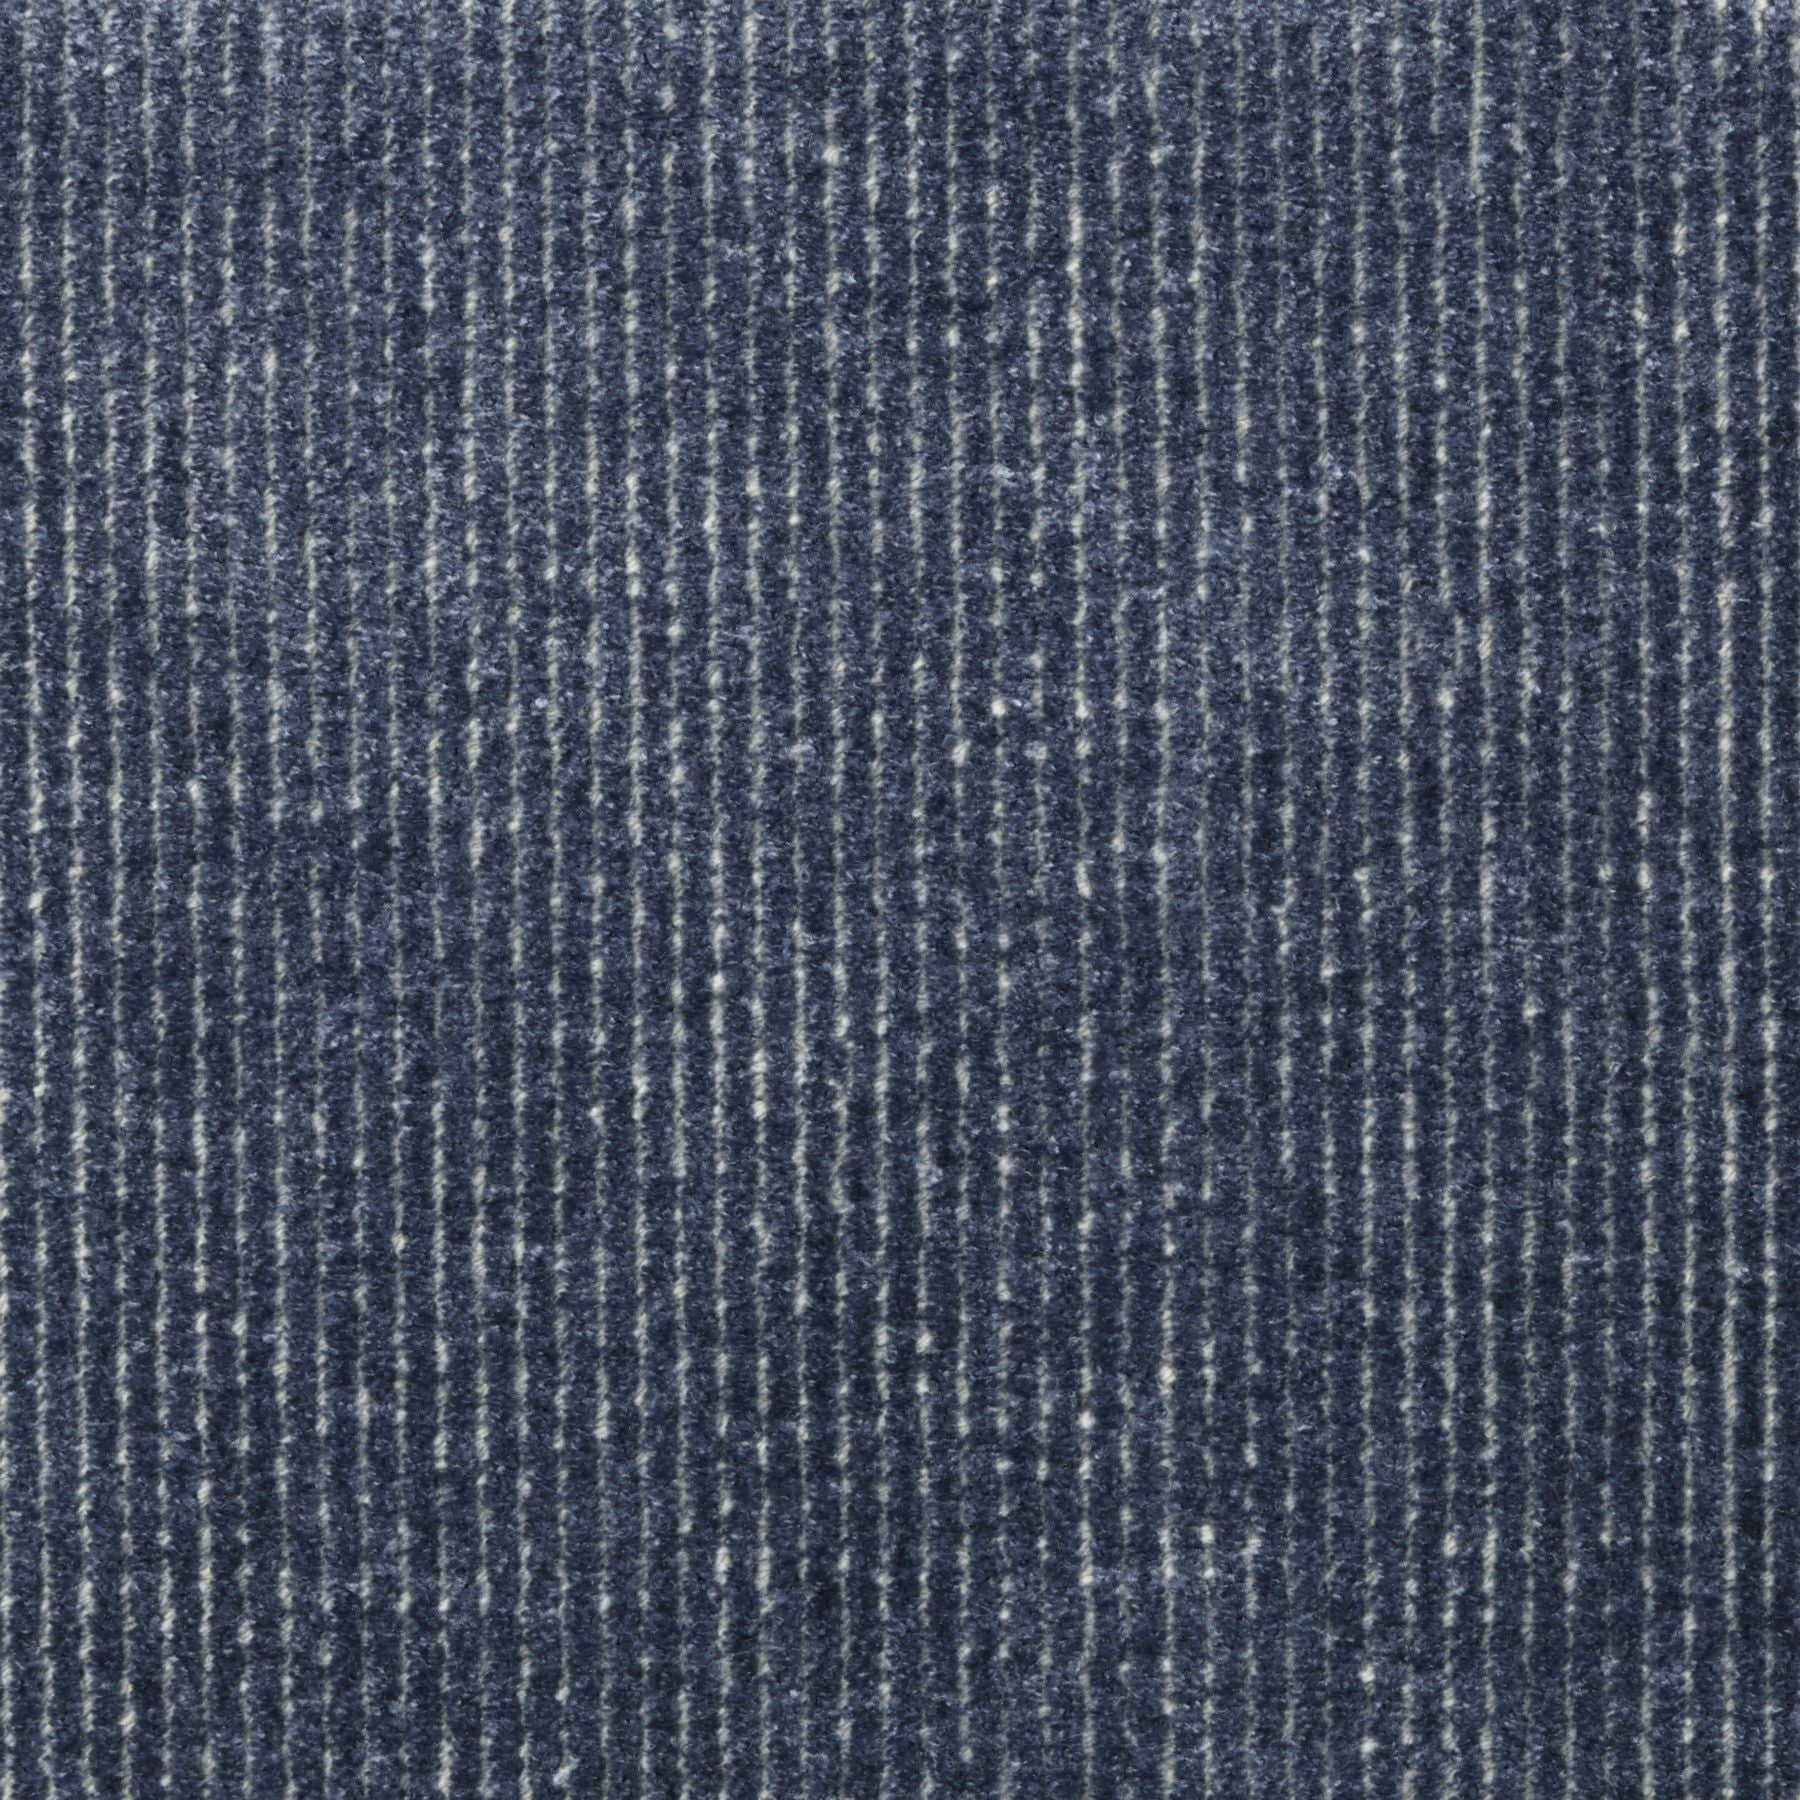 Synthetic-blend broadloom carpet swatch in a dimensional ribbed weave in navy.